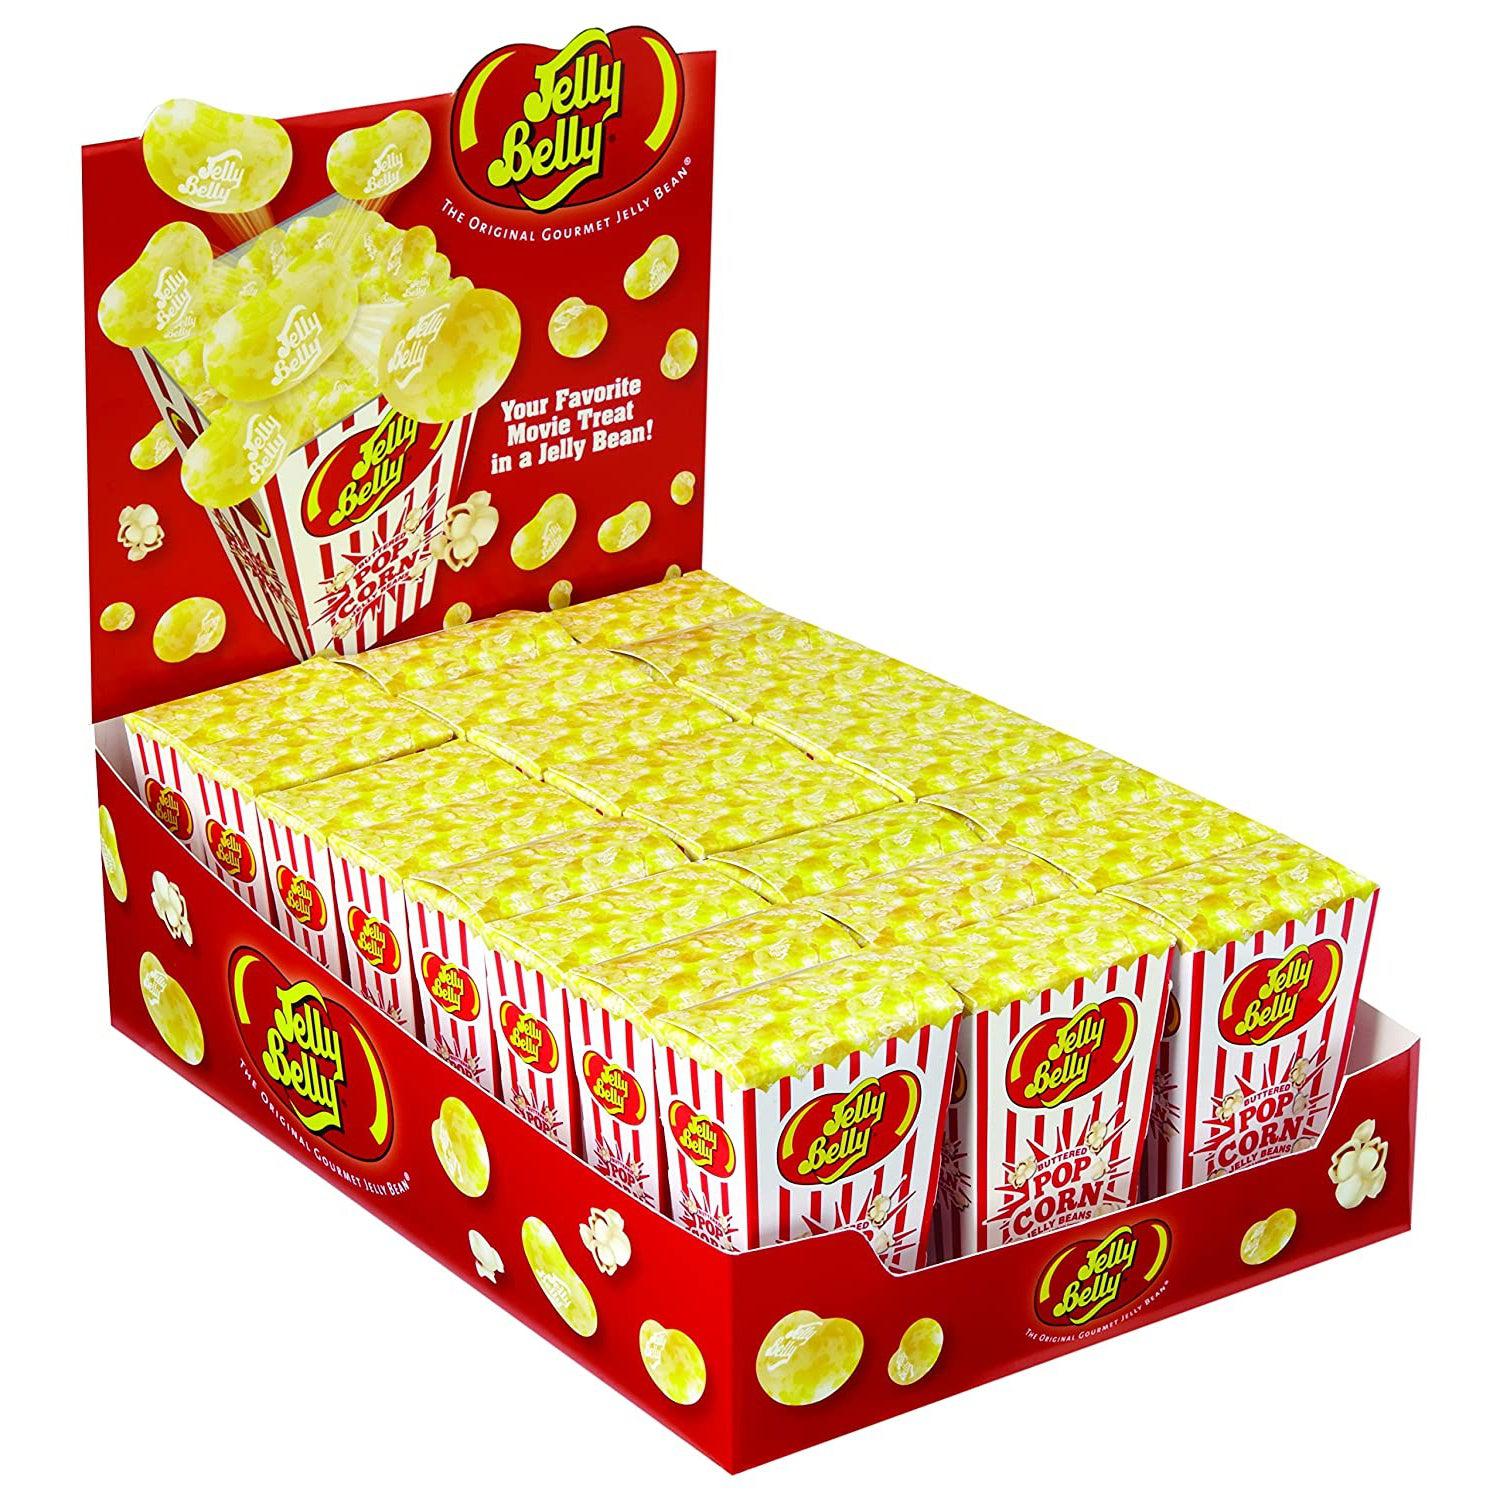 Jelly Belly-Buttered Popcorn Jelly Beans 1.75 oz. Box-63691-Box of 24-Legacy Toys